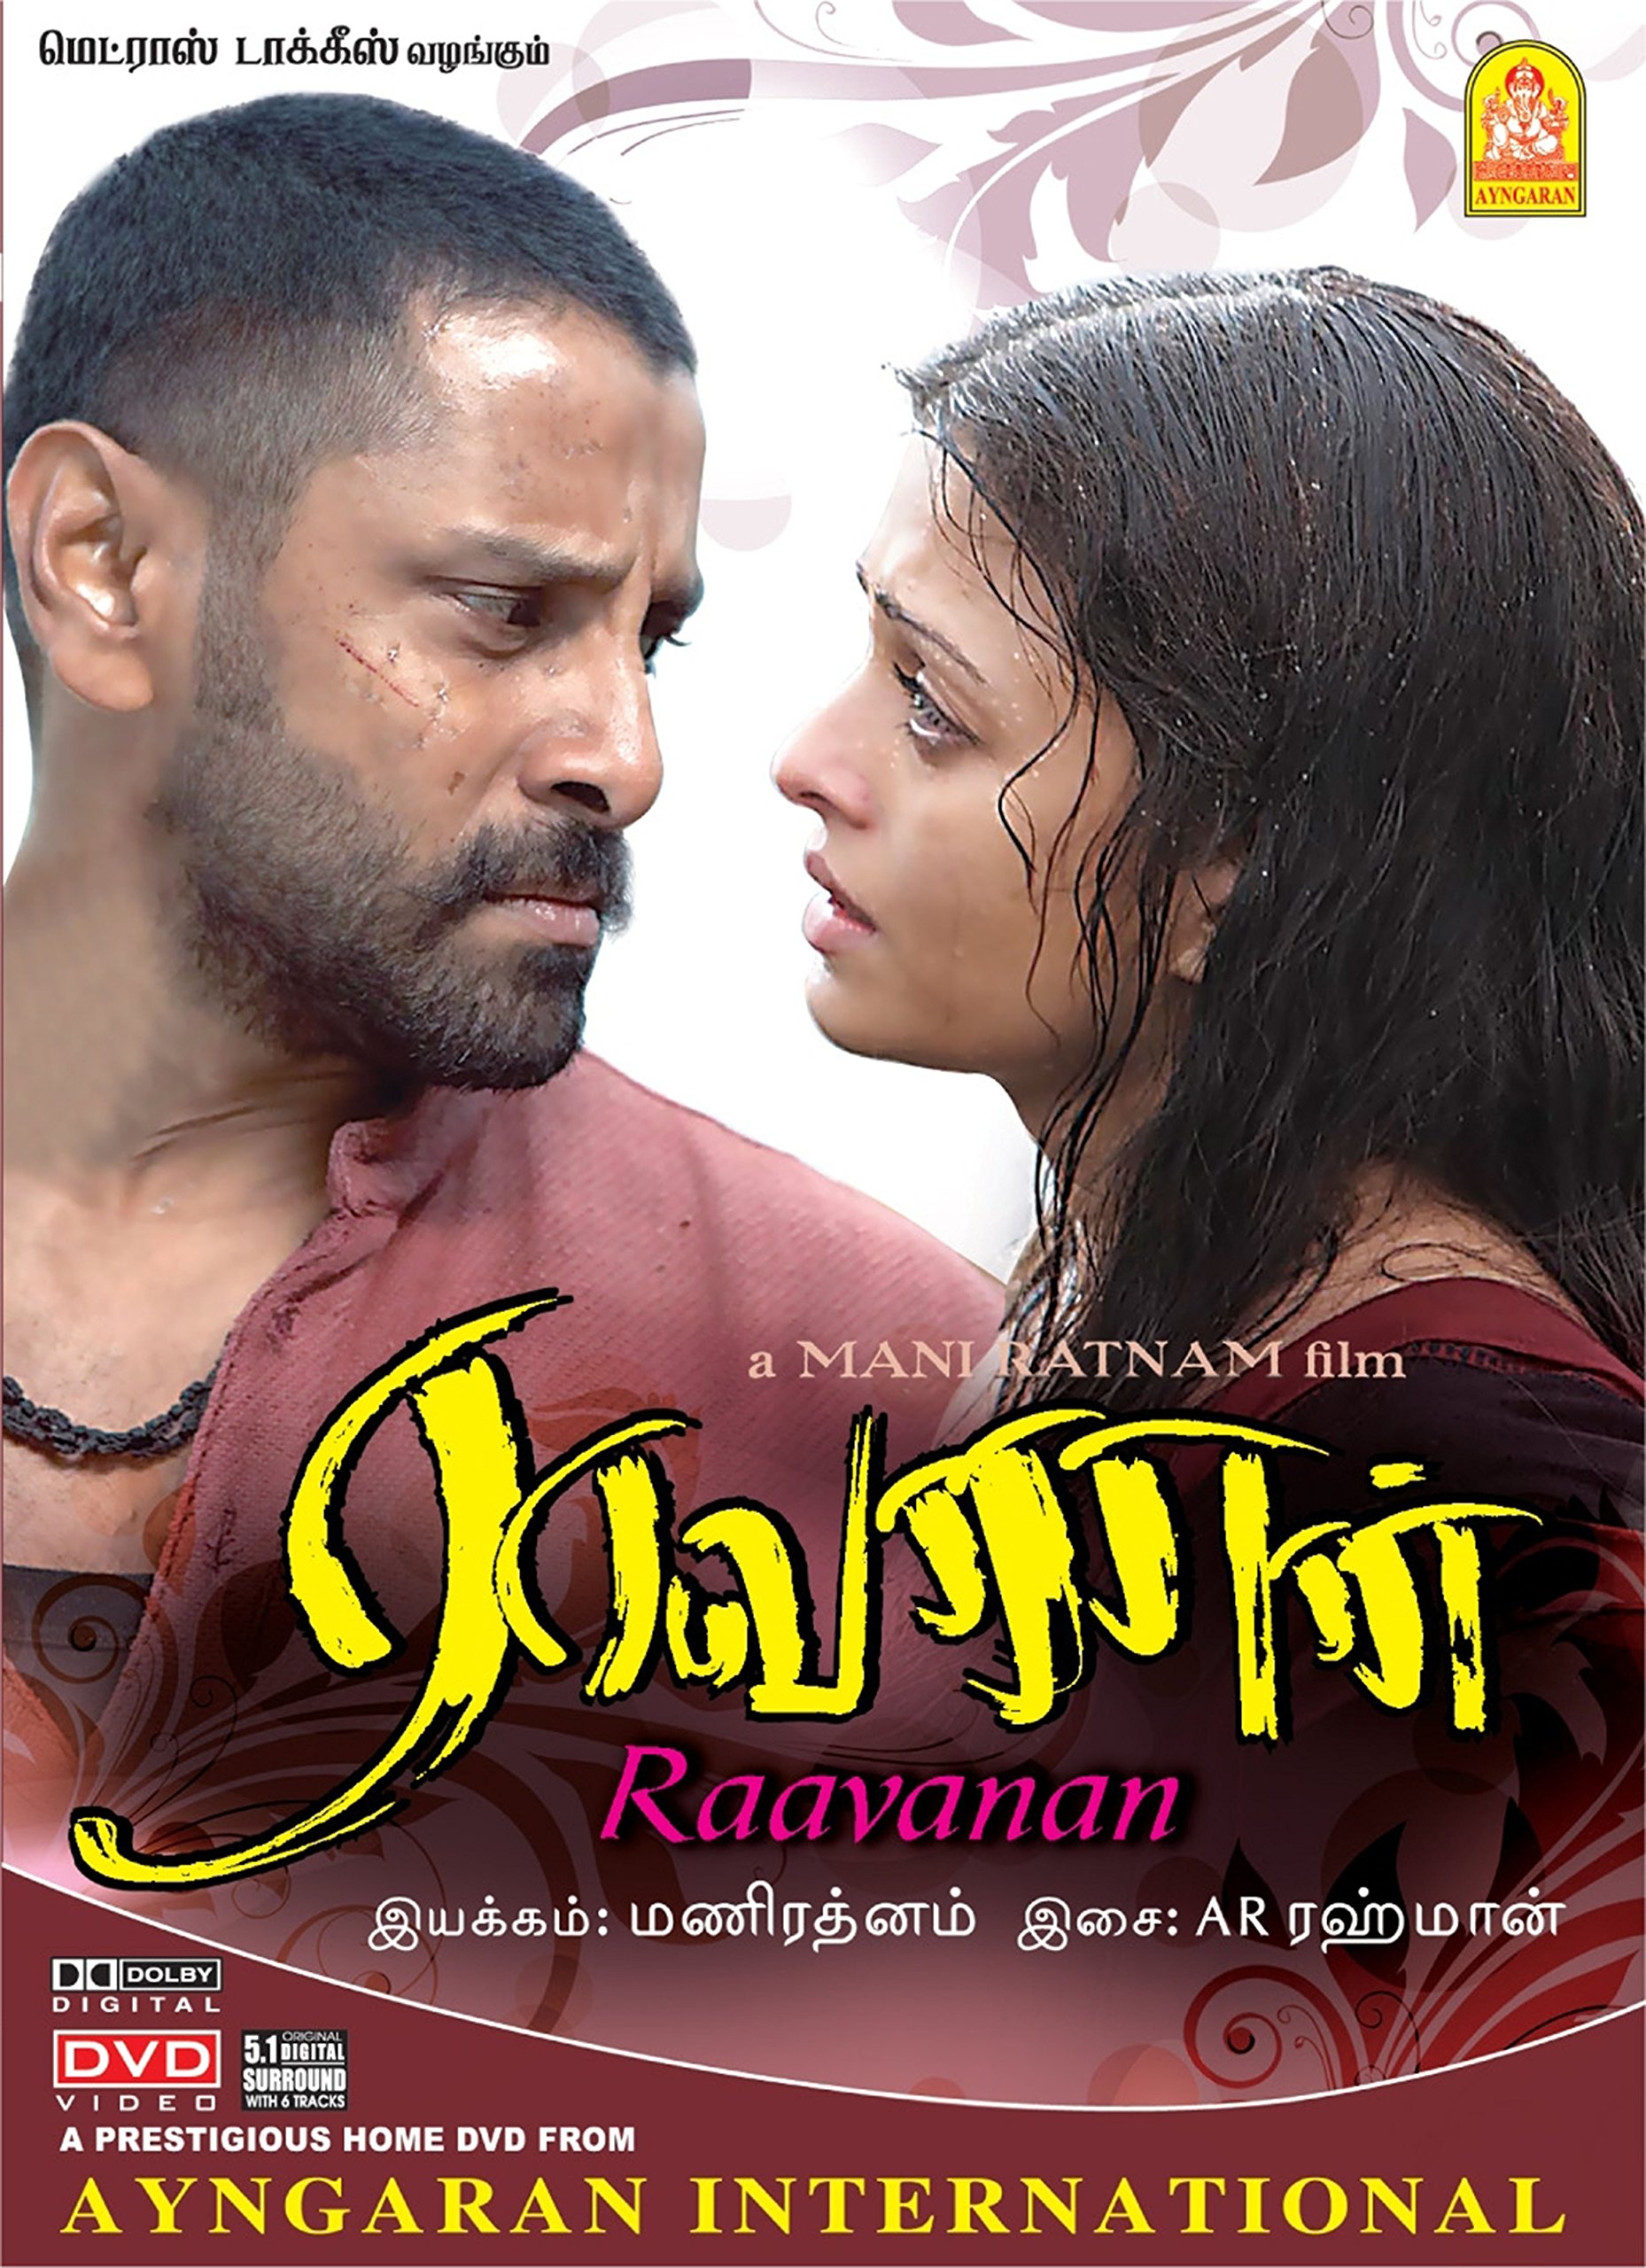 adel pierre recommends tamil movie dvd online pic